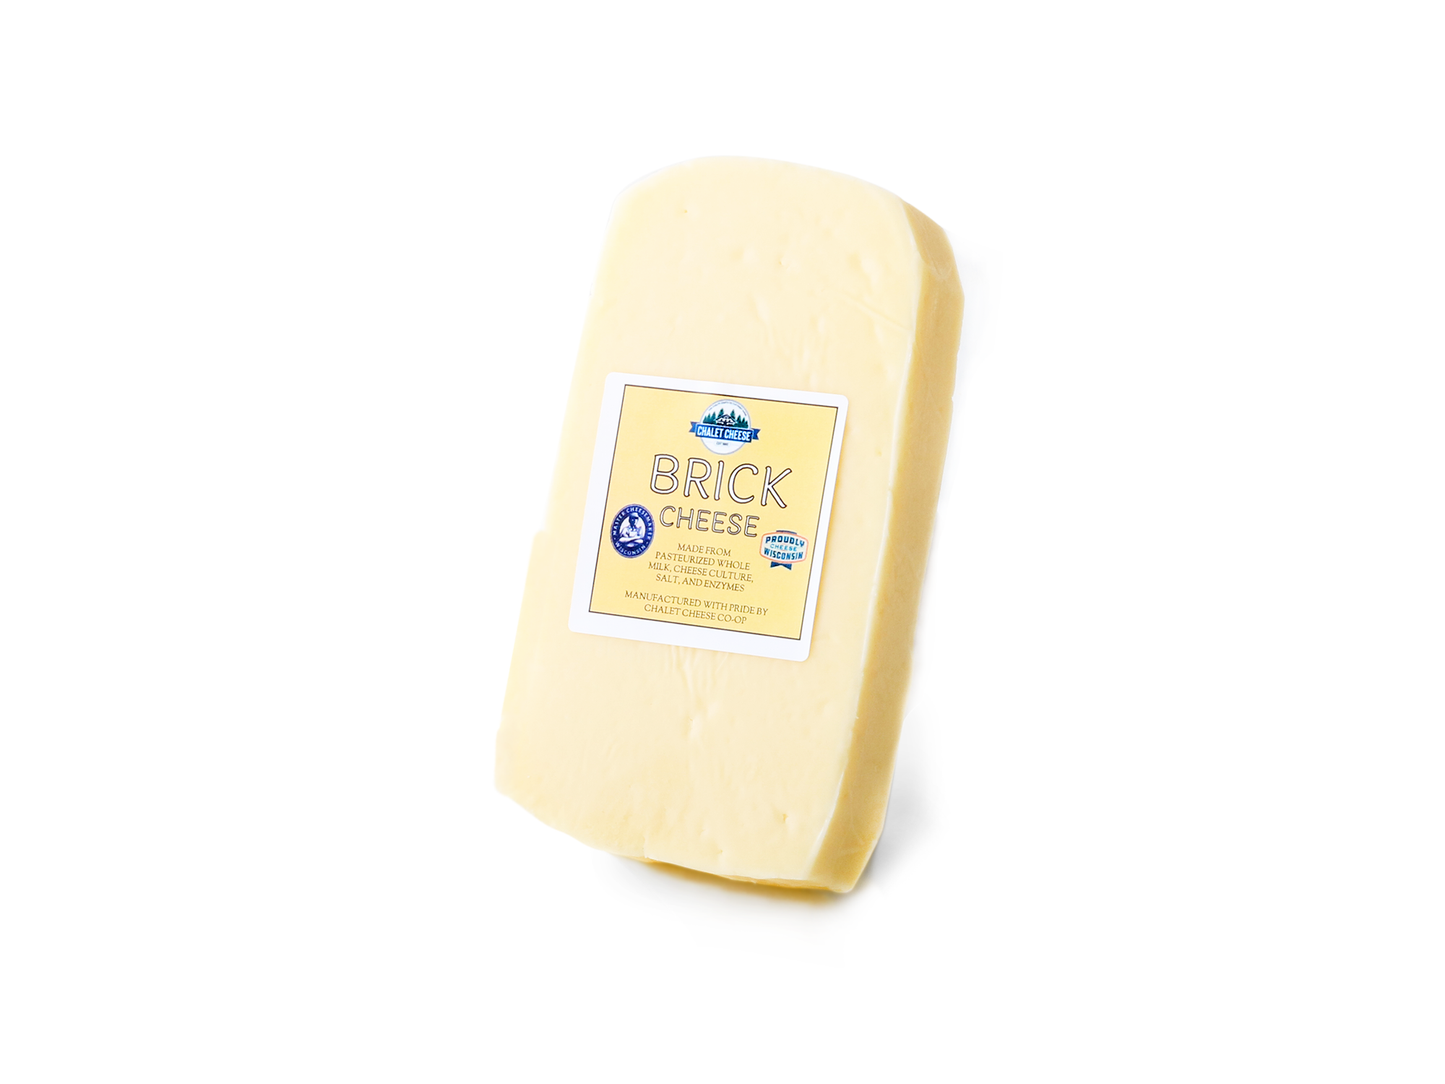 8 ounce piece of Wisconsin brick cheese from chalet cheese